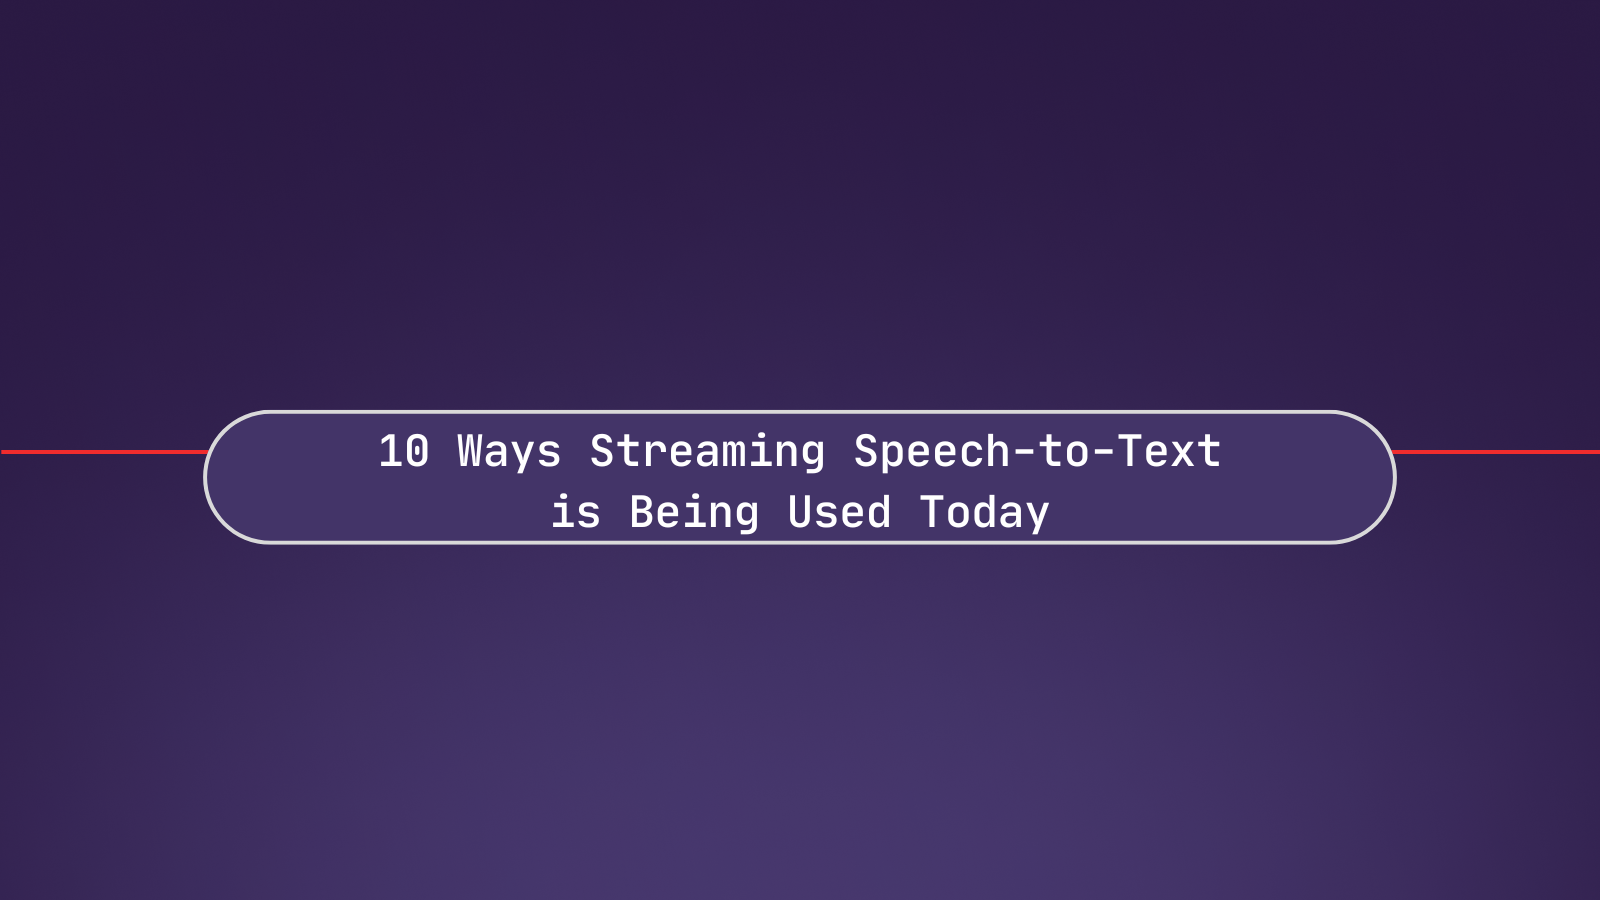 10 Ways Streaming Speech-to-Text (Live Transcription) is Being Used Today